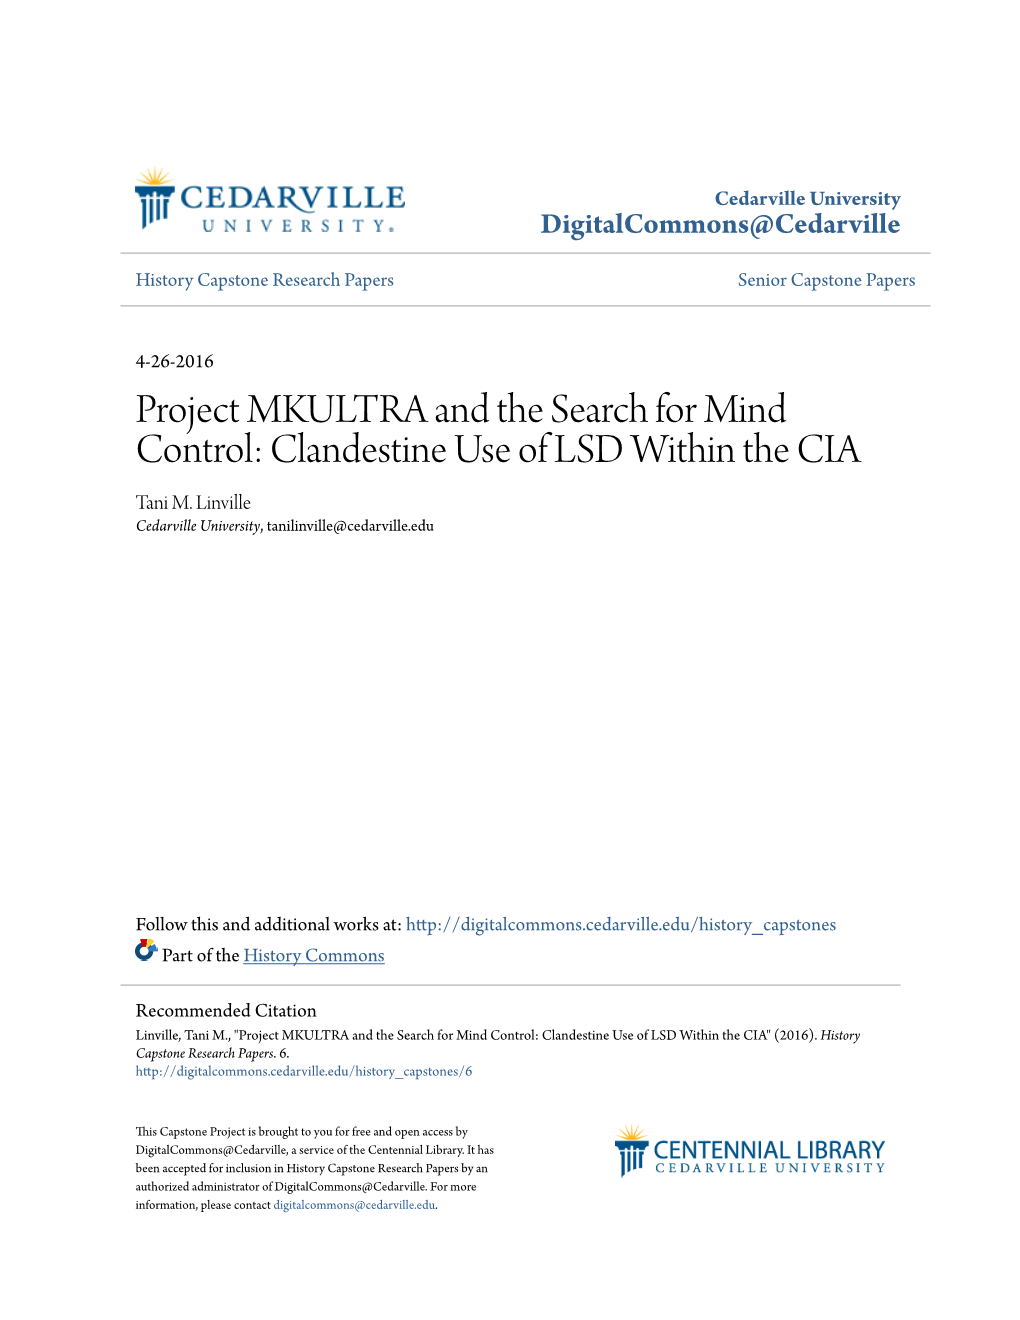 Project MKULTRA and the Search for Mind Control: Clandestine Use Of